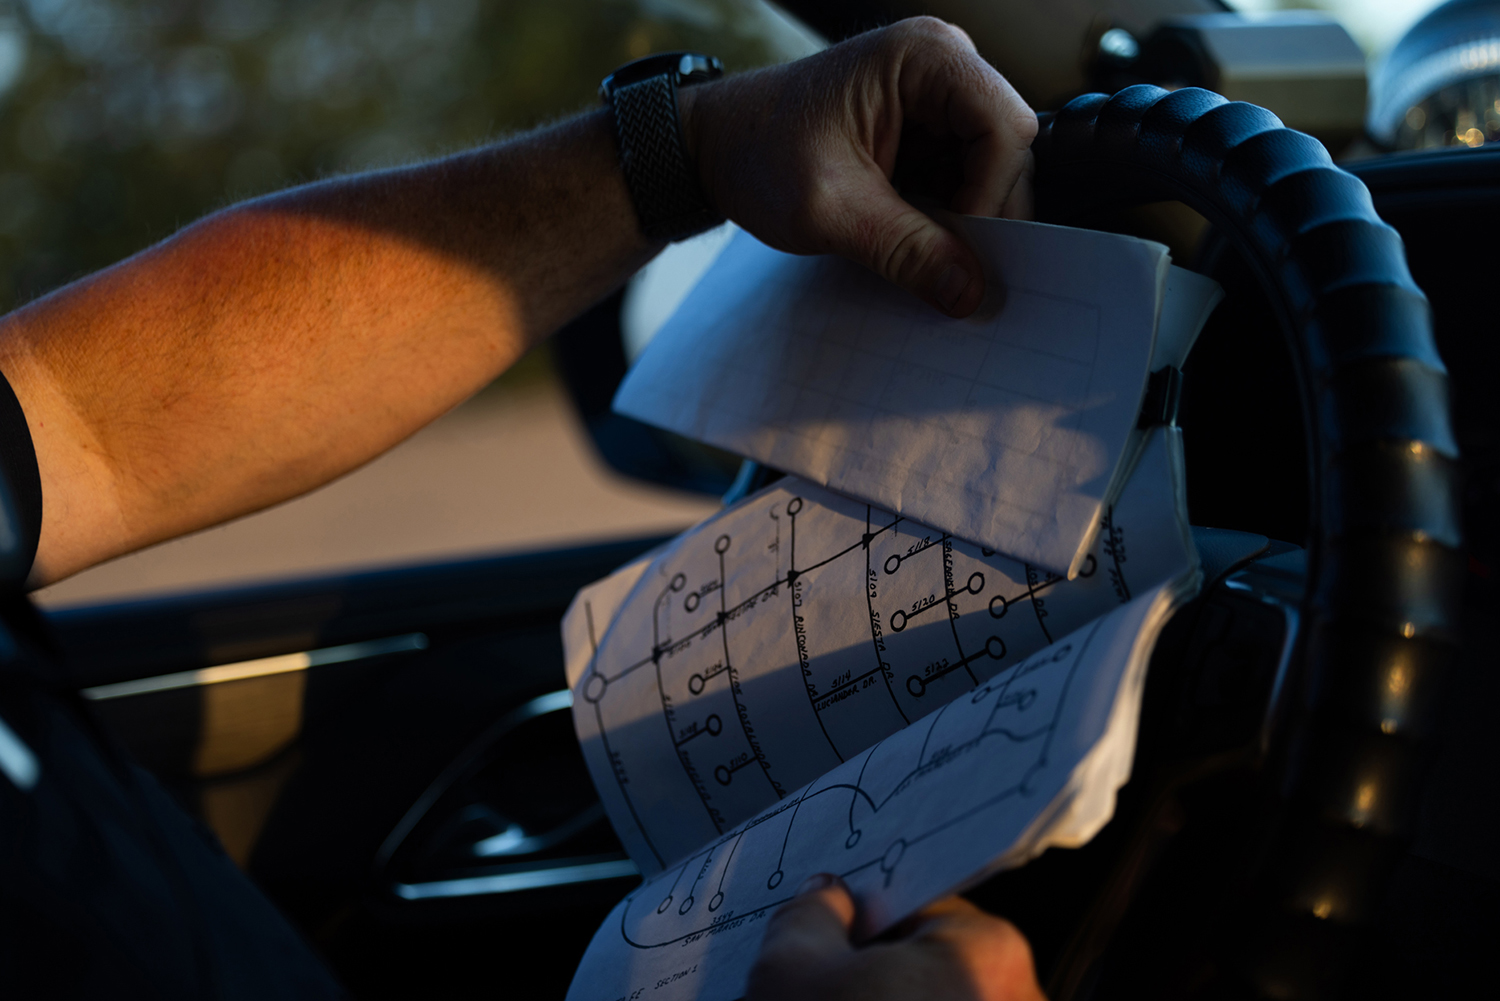 Liberty County Sheriff's Cpl. Robert Whitesel looks at a street map of newly developed areas in the county